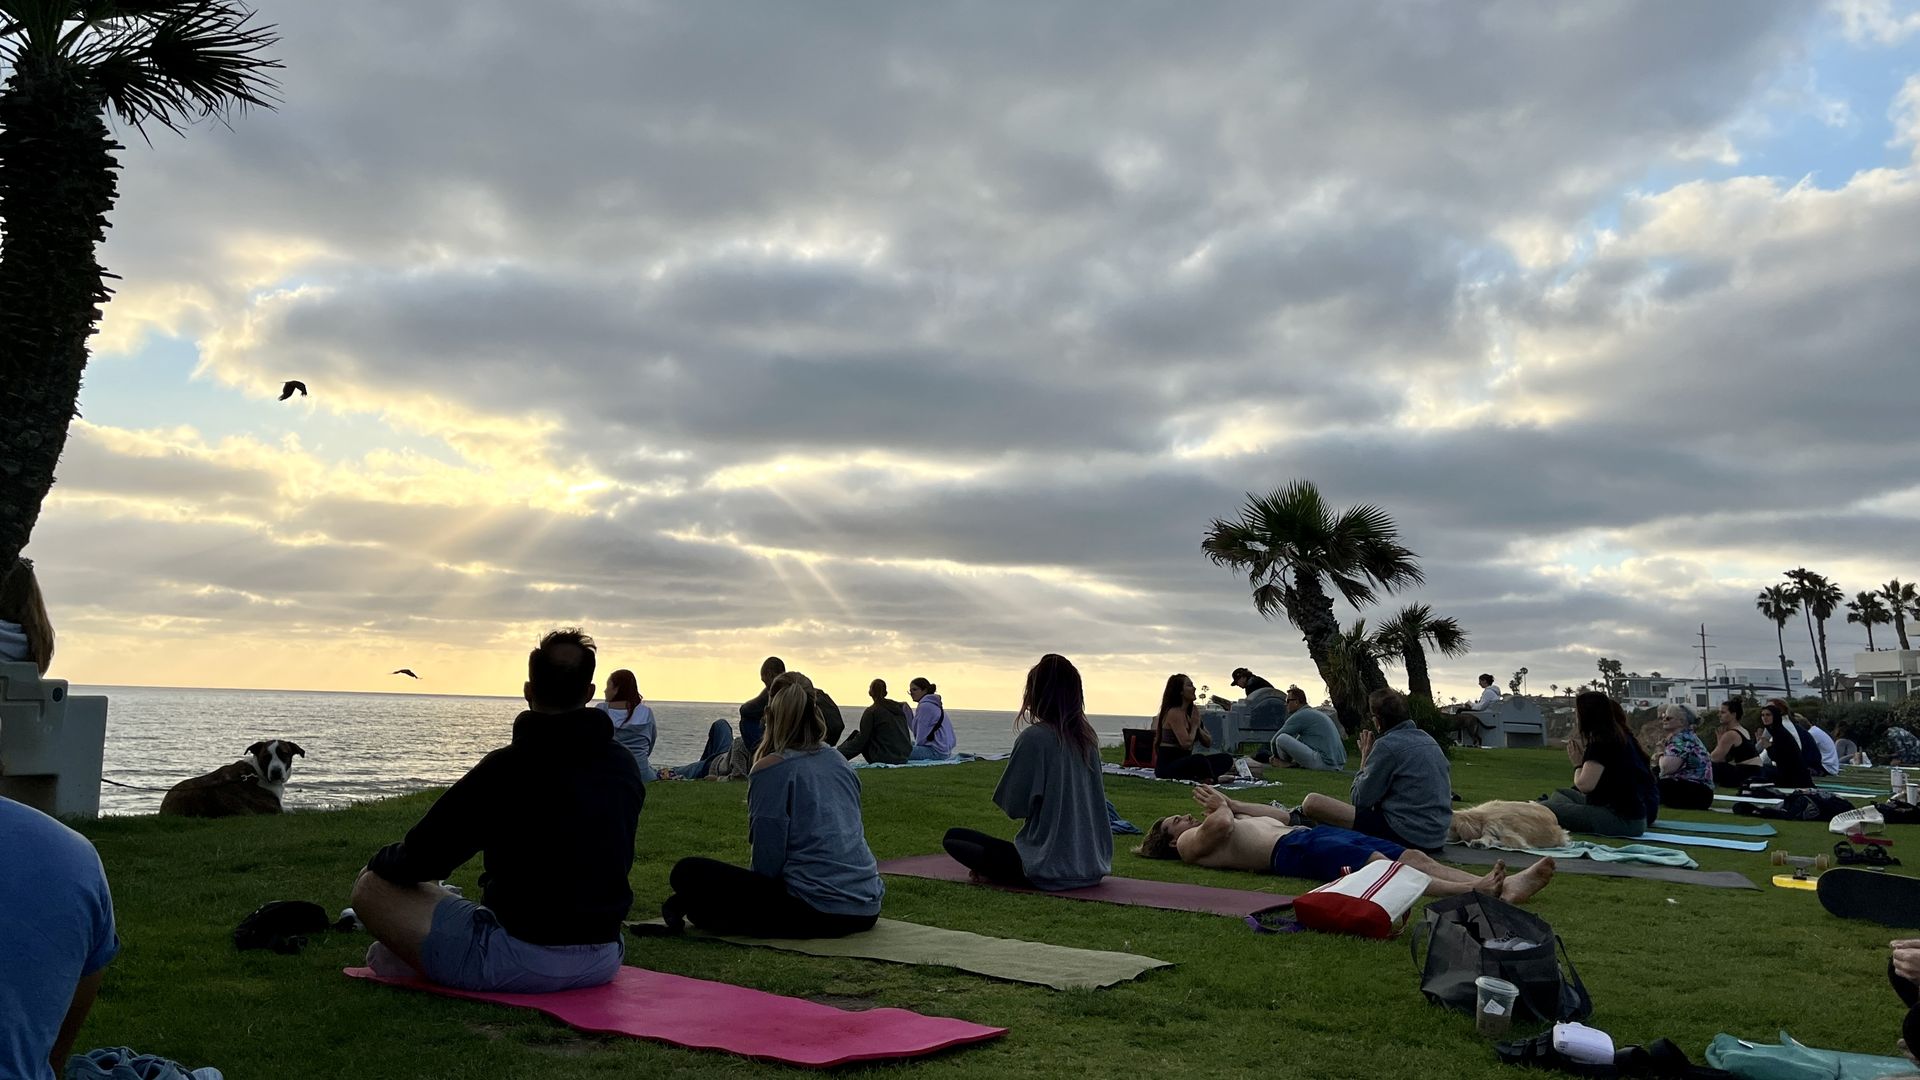 People sit on yoga mats at a grassy park overlooking the ocean at sunset.